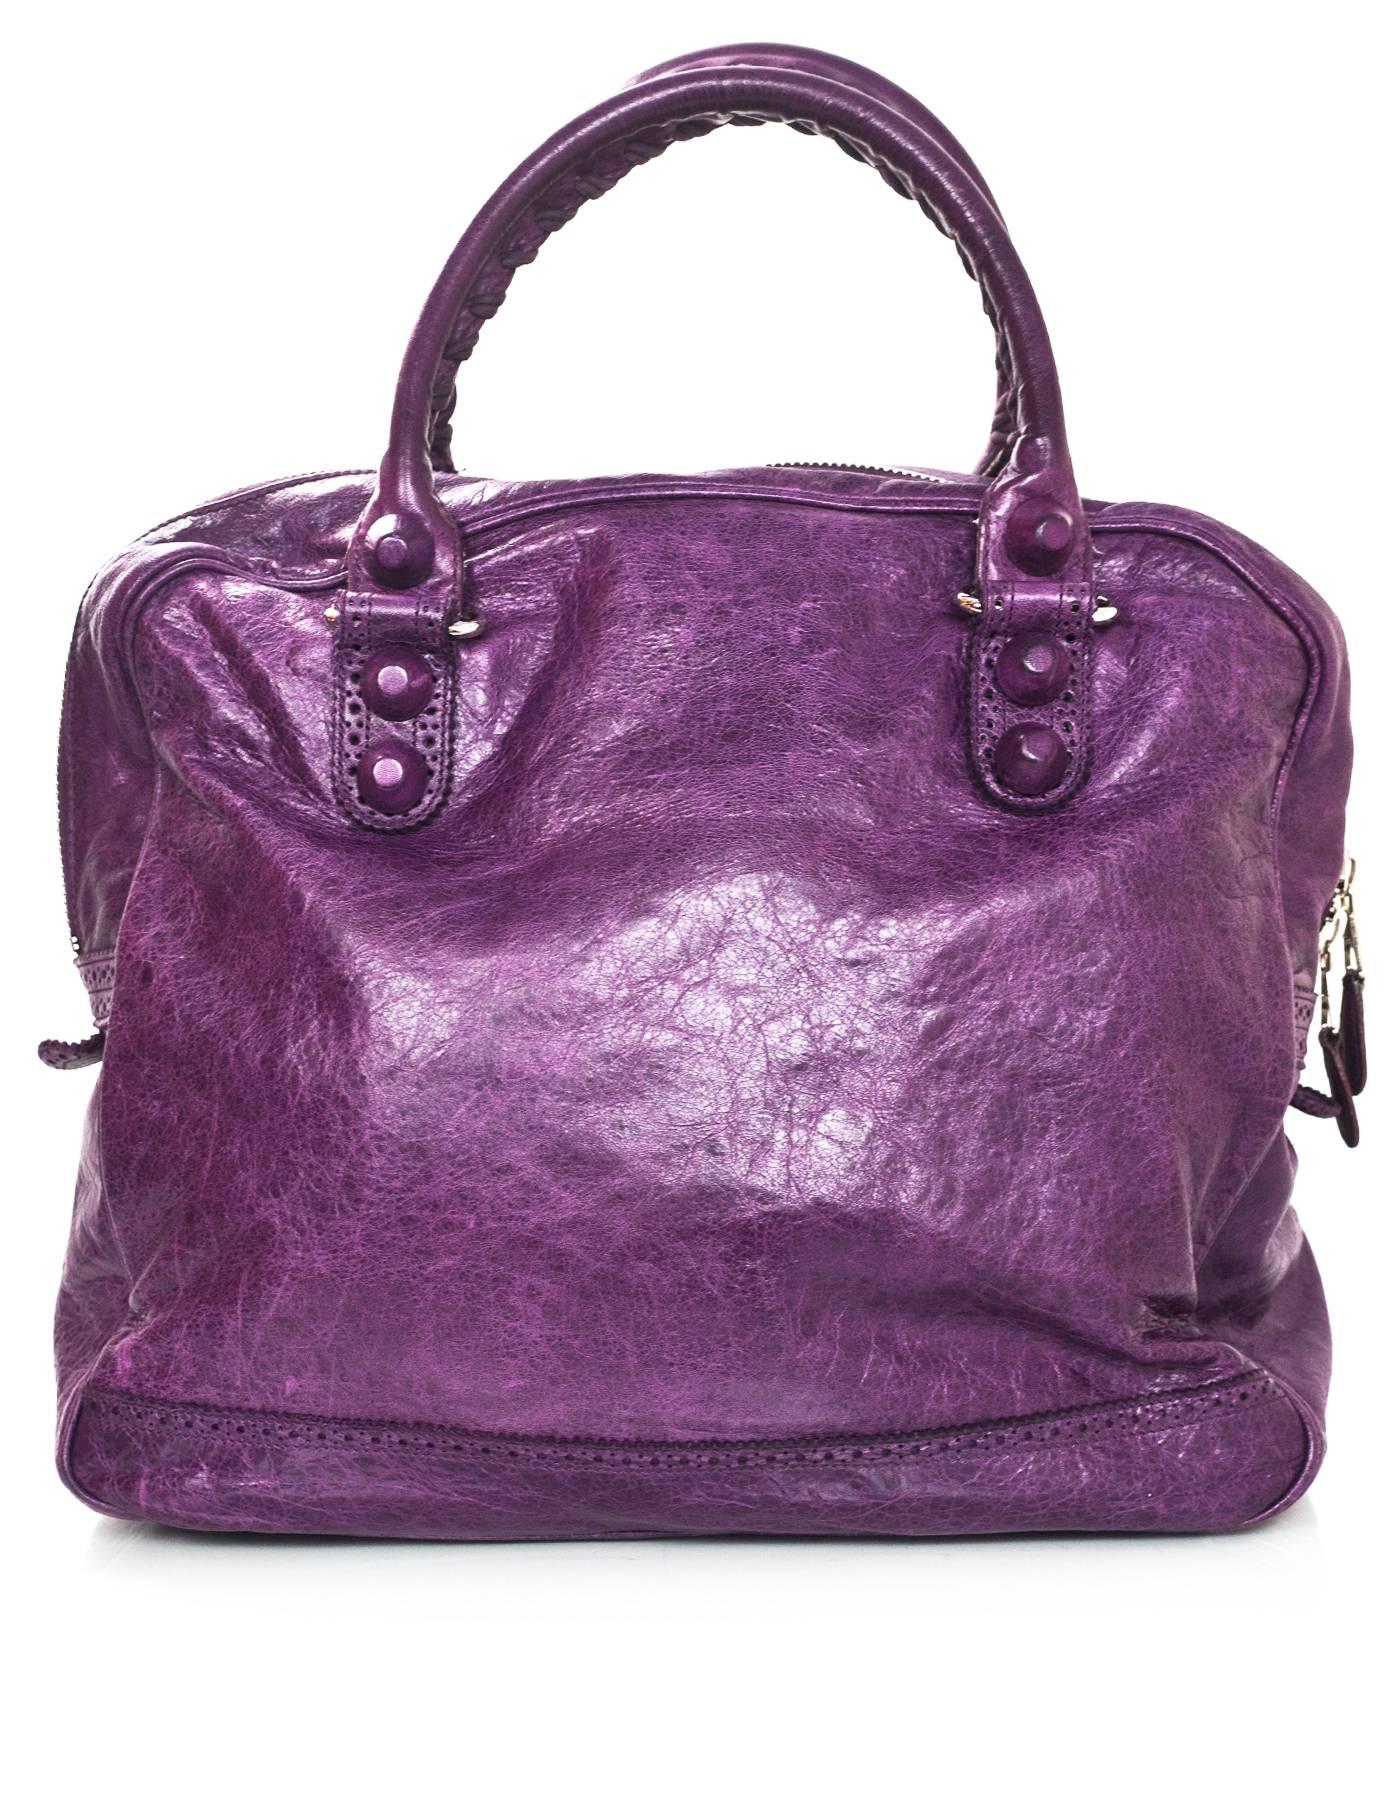 Balenciaga Purple Agneau Lambskin Covered Giant Brogues Office Bag 
Features purple leather covered grommets

Made In: Italy
Color: Purple
Hardware: Silvertone
Materials: Distressed leather
Lining: Black canvas
Closure/Opening: Zip across